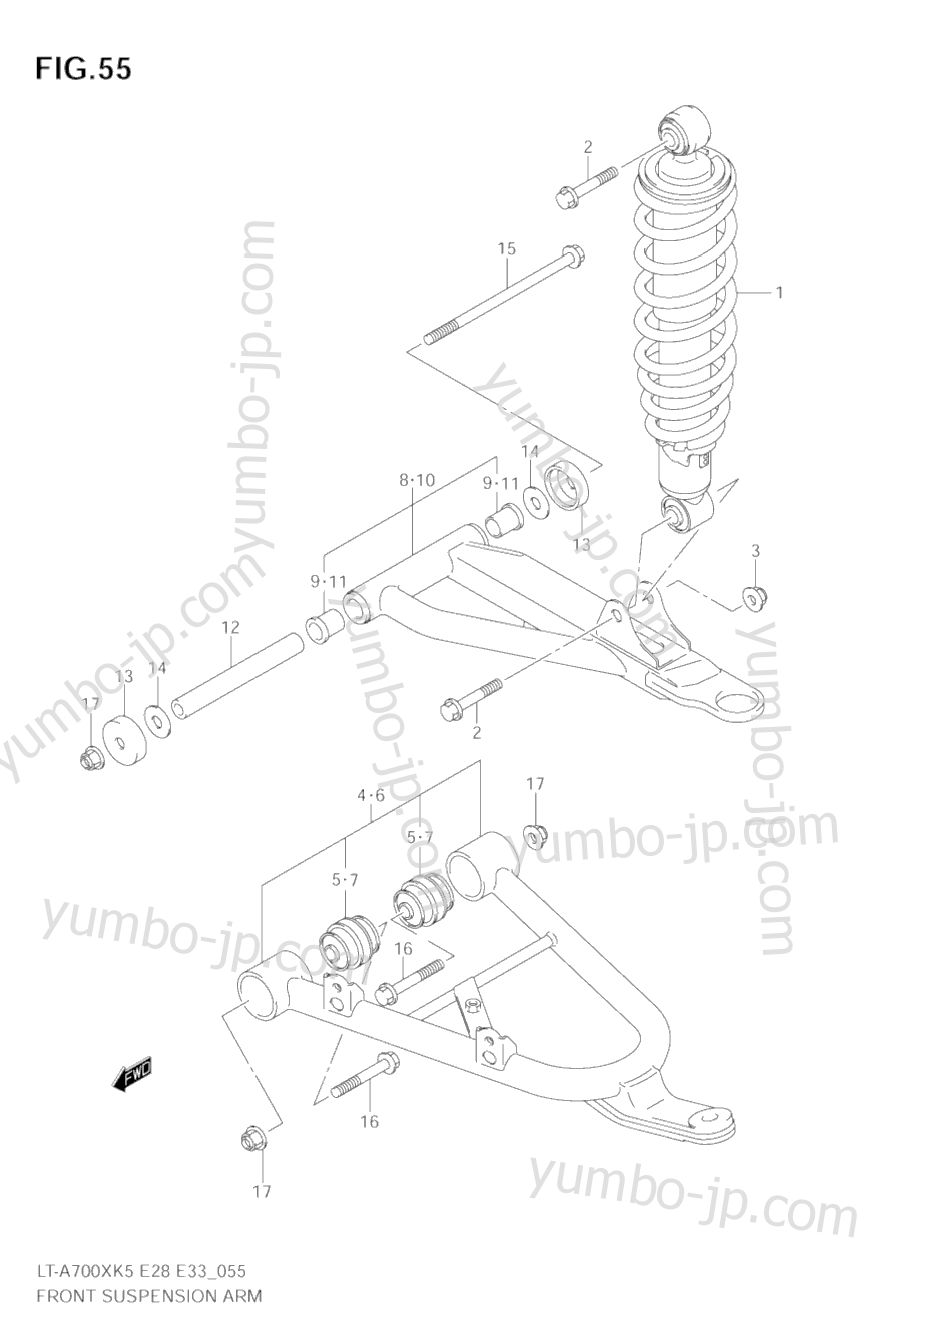 FRONT SUSPENSION ARM for ATVs SUZUKI KingQuad (LT-A700X) 2005 year